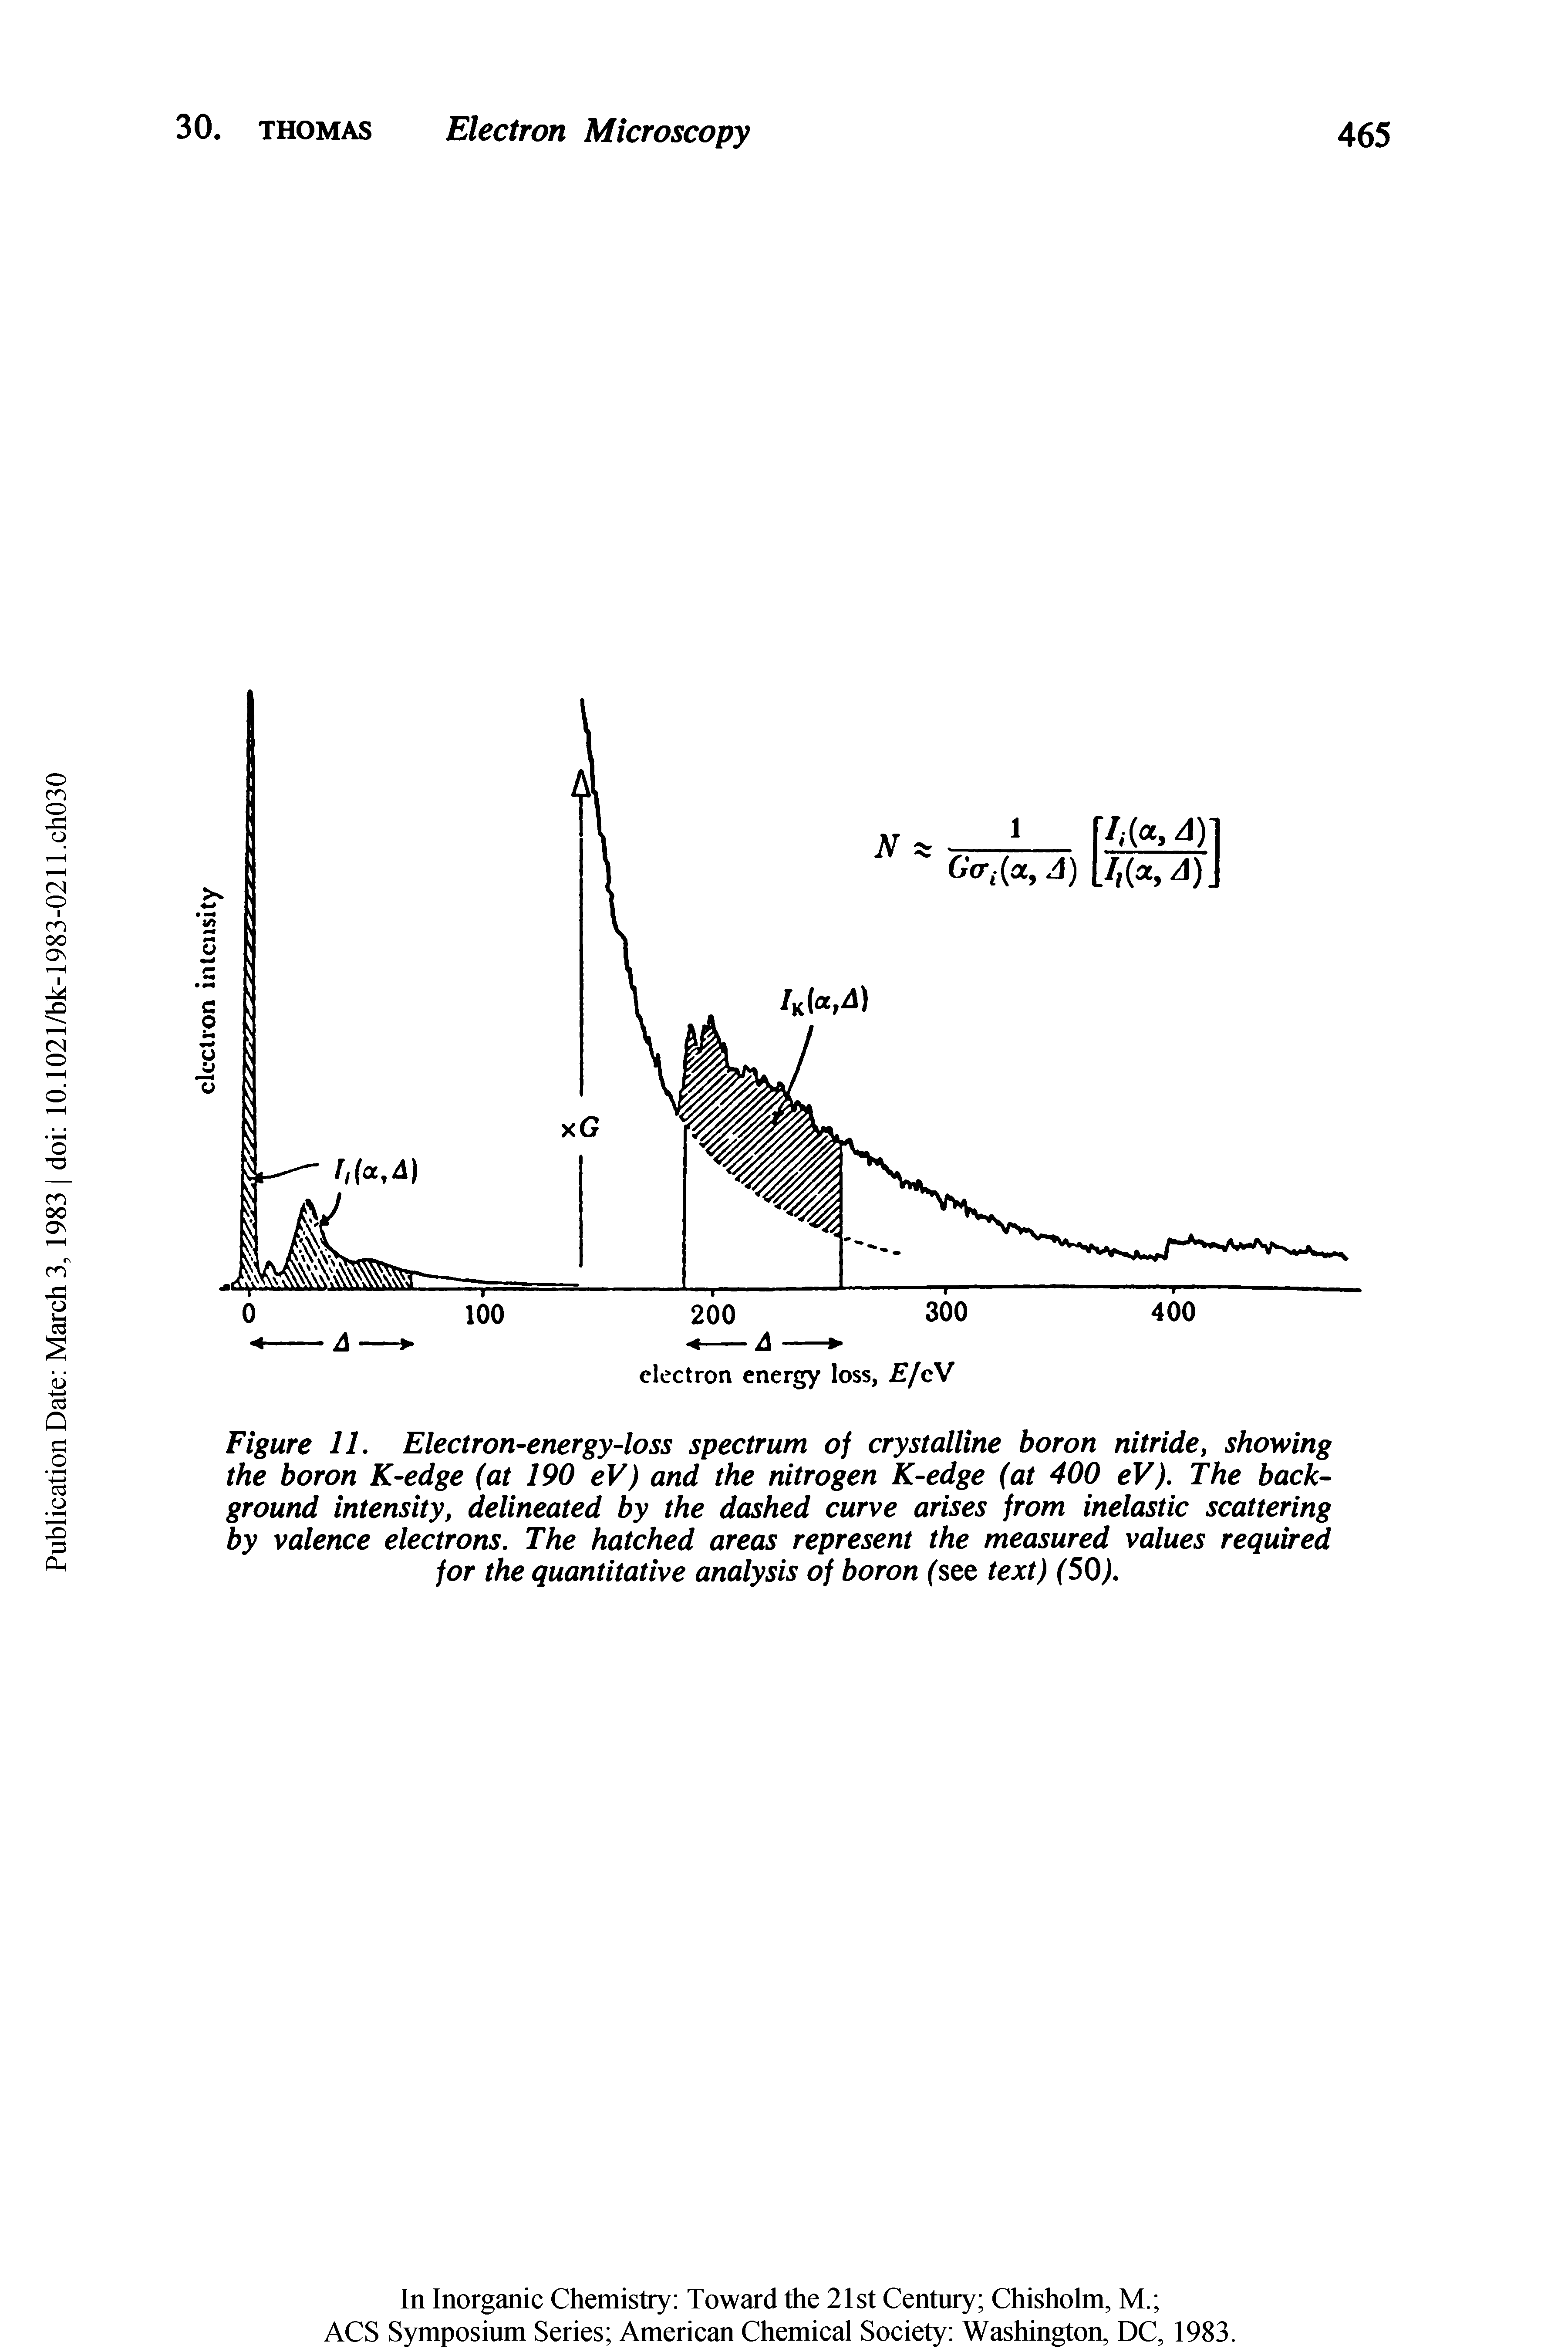 Figure 11. Electron-energy-loss spectrum of crystalline boron nitride, showing the boron K-edge (at 190 eV) and the nitrogen K-edge (at 400 eV). The background intensity, delineated by the dashed curve arises from inelastic scattering by valence electrons. The hatched areas represent the measured values required for the quantitative analysis of boron ( see text) (50).